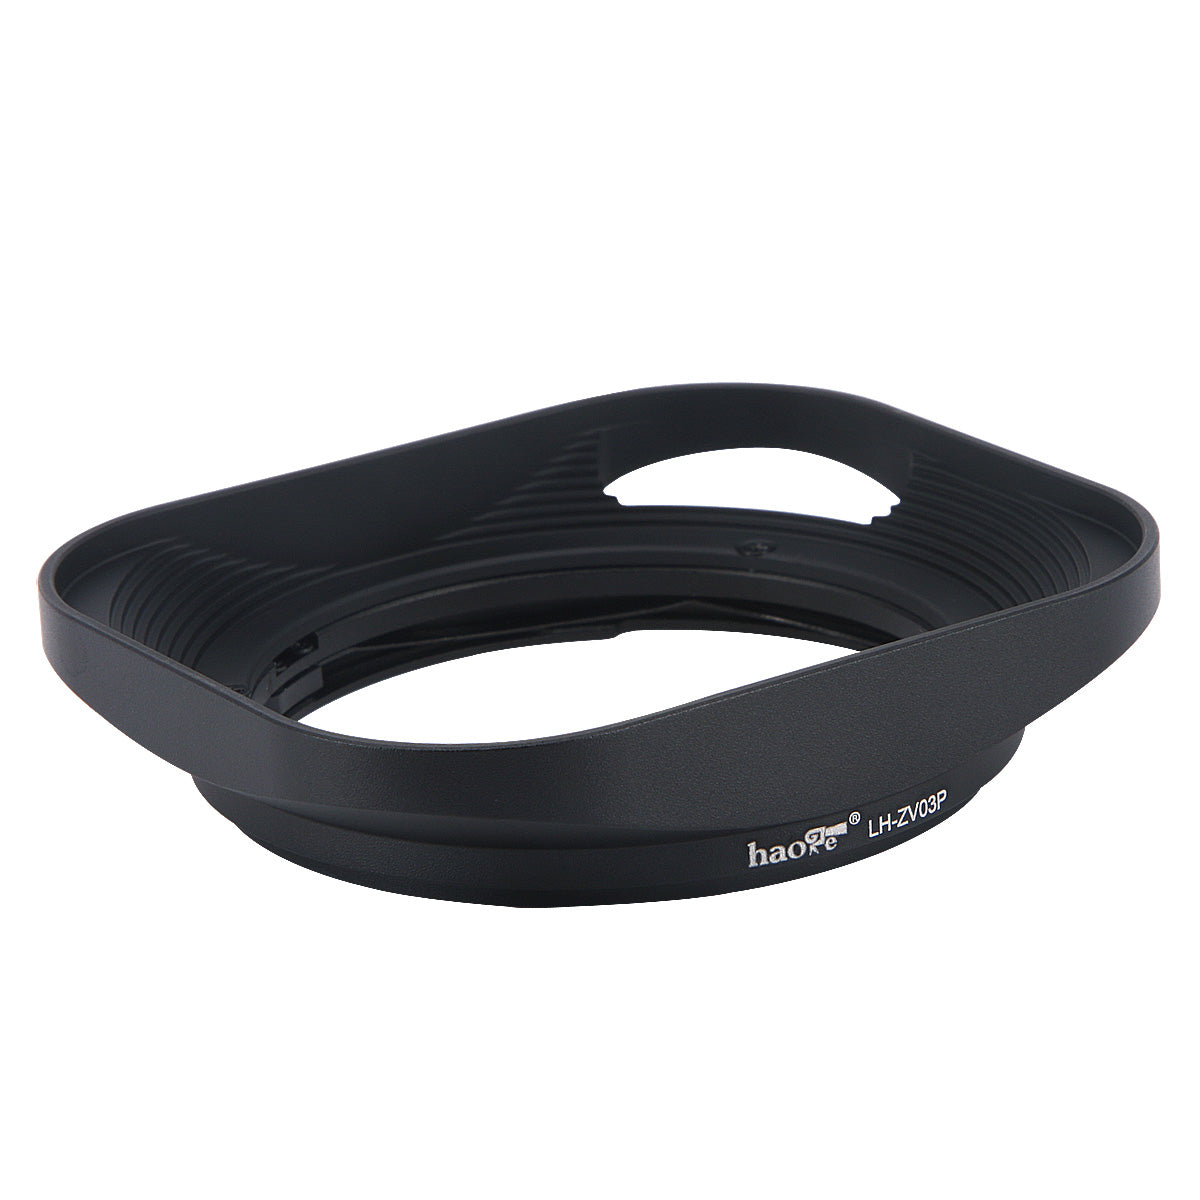 Haoge LH-ZV03P Lens Hood for Carl Zeiss Distagon T 2.8/21 21mm f2.8 ZM, C Biogon T 4.5/21 21mm f4.5 ZM, 2.8/25 25mm f2.8 ZM, 2.8/28 28mm f2.8 ZM, C Sonnar T 1.5/50 50mm f1.5 ZM Hollow Out Designed